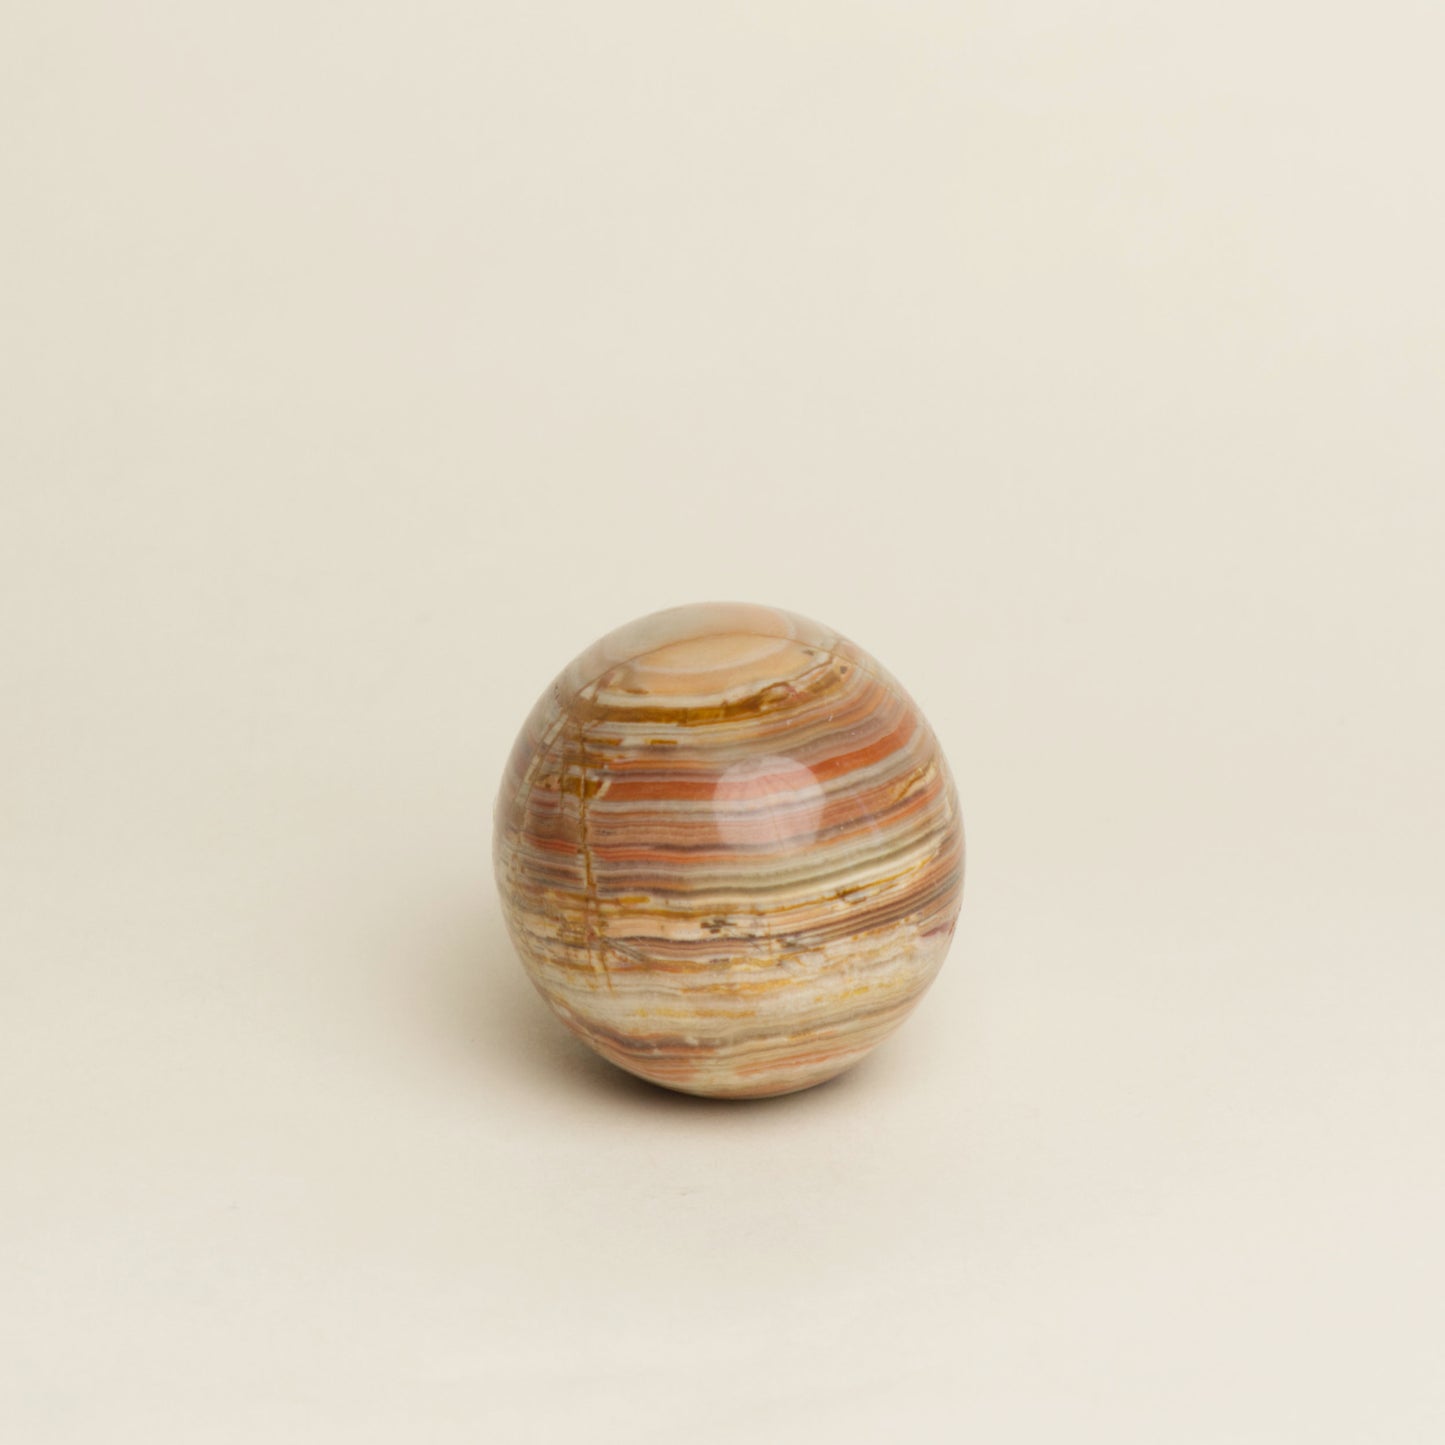 EGG OBJECT MARBLE EARTH COLOR